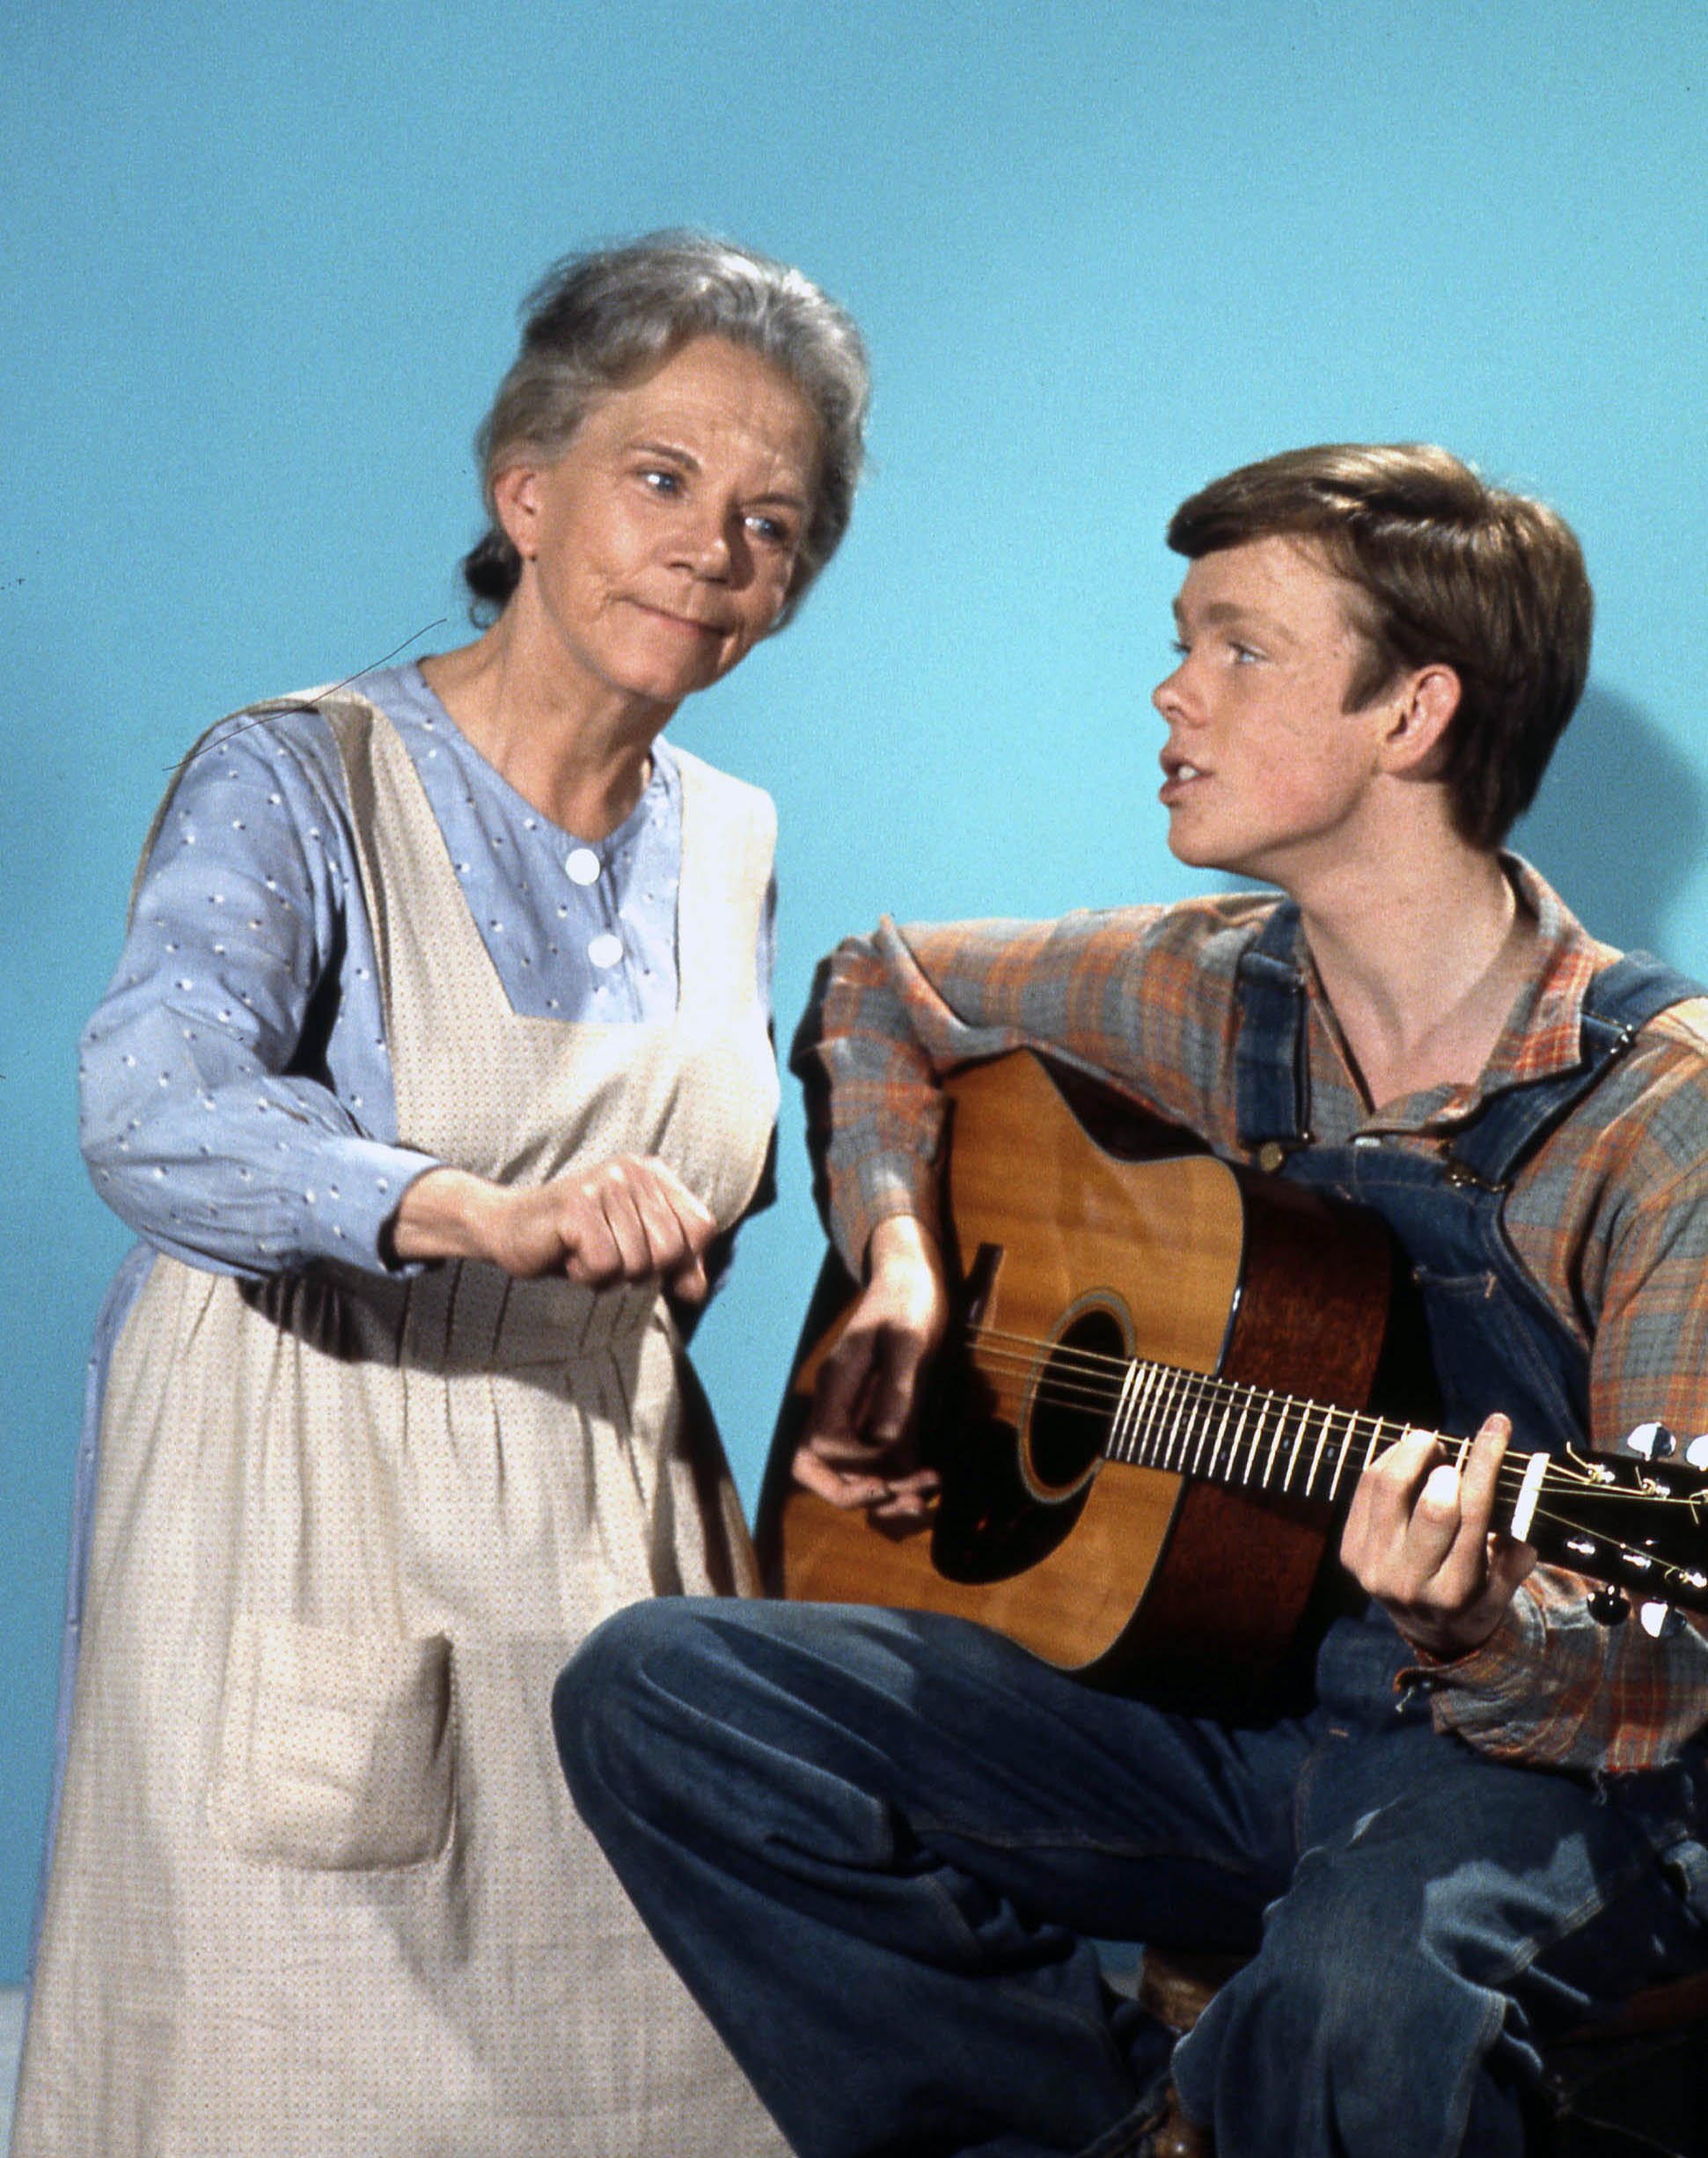 Ellen Corby as Esther Walton and Jon Walmsley as Jason Walton in "The Waltons," on January 1, 1977, in Los Angeles. | Source: Getty Images